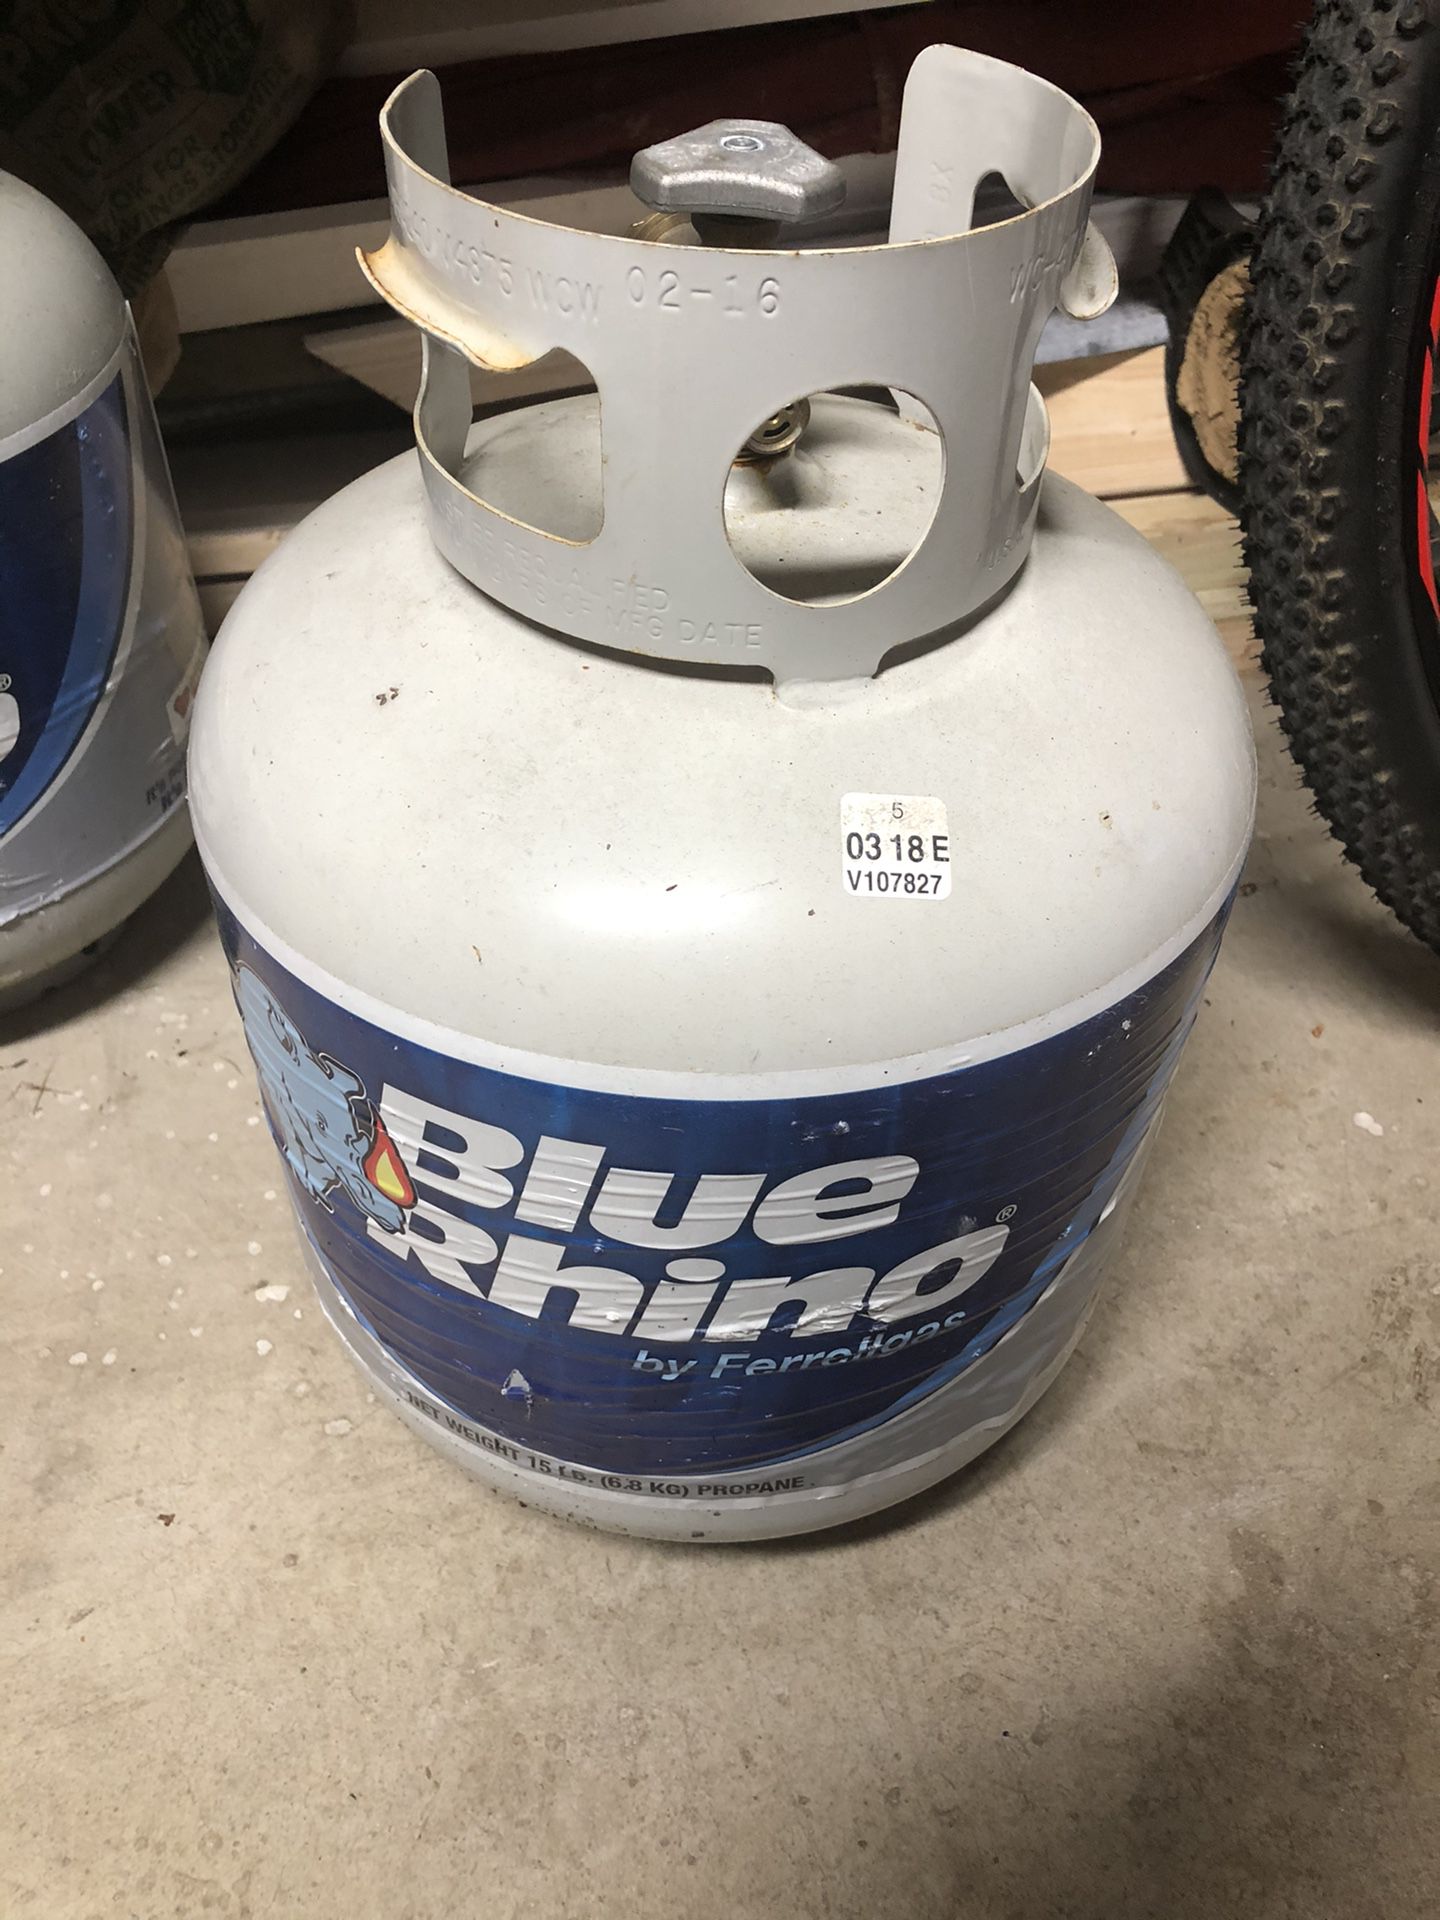 Empty Refillable Propane tanks for grills or RVs